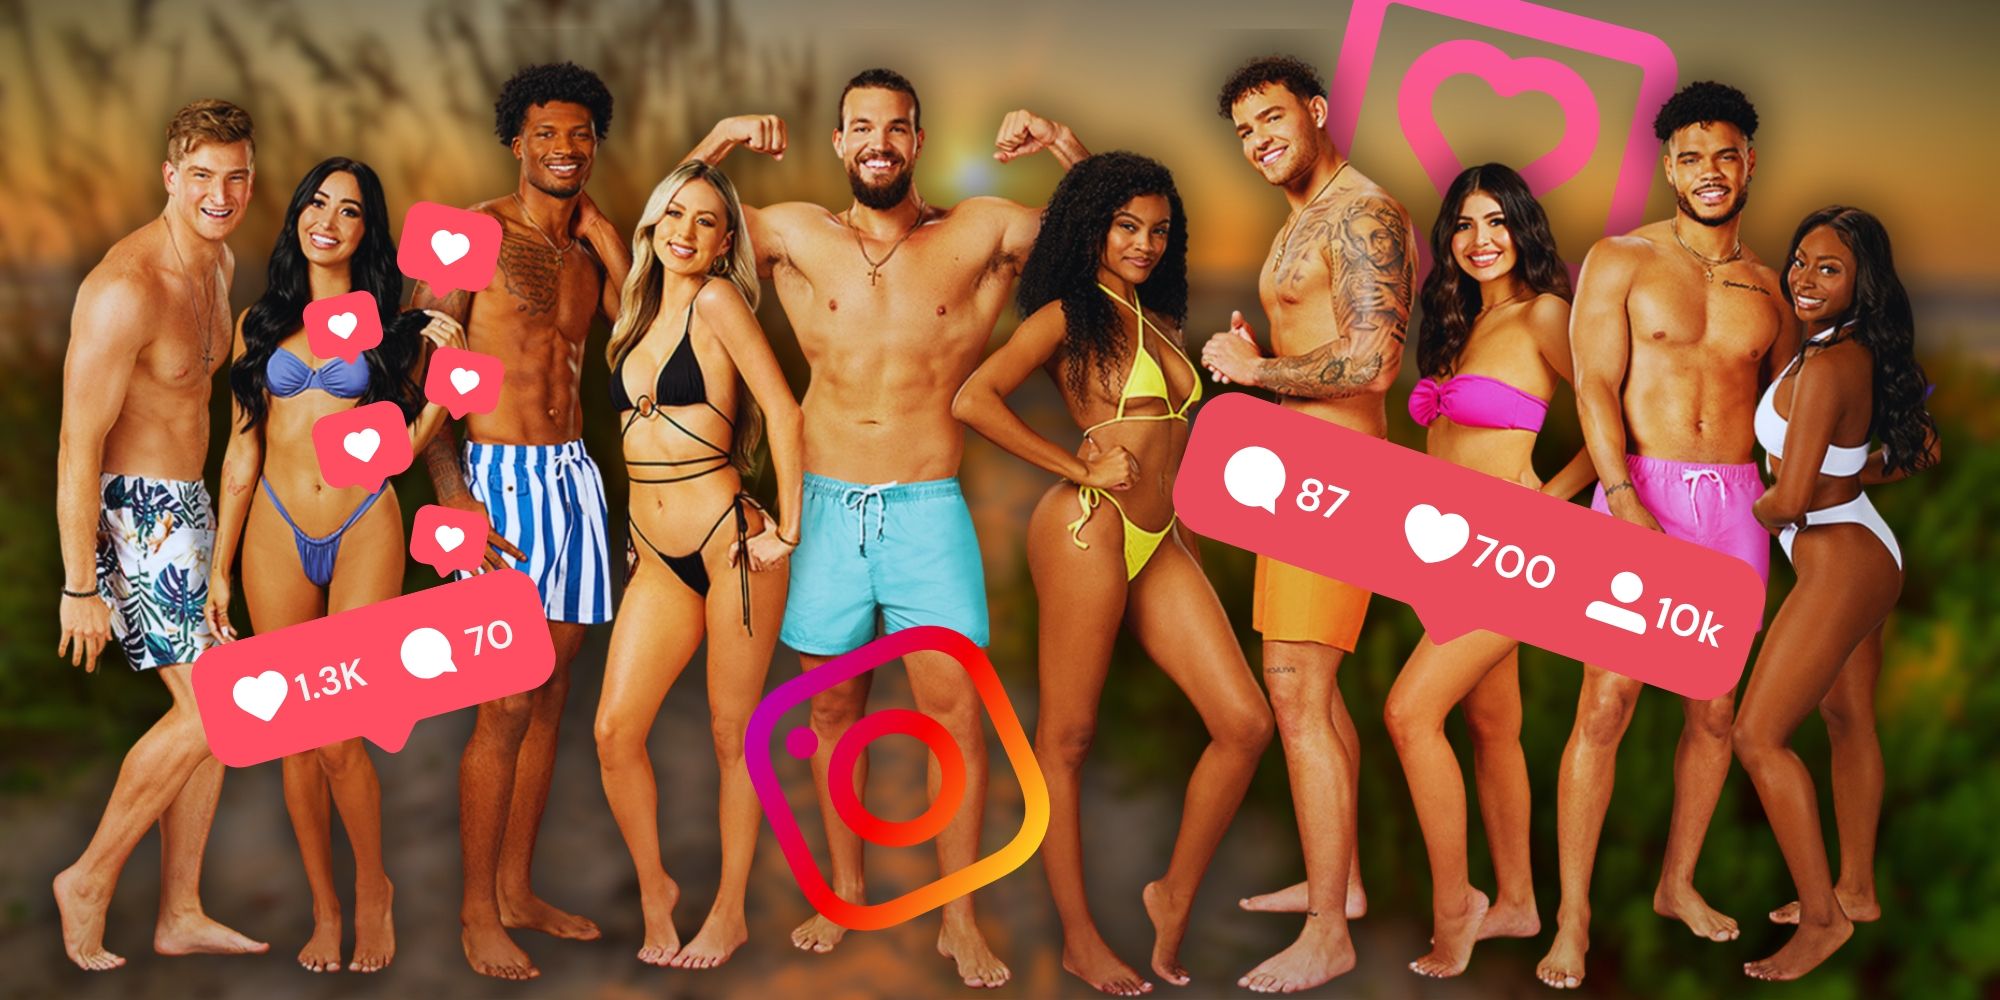 Where To Follow The Contestants On Instagram